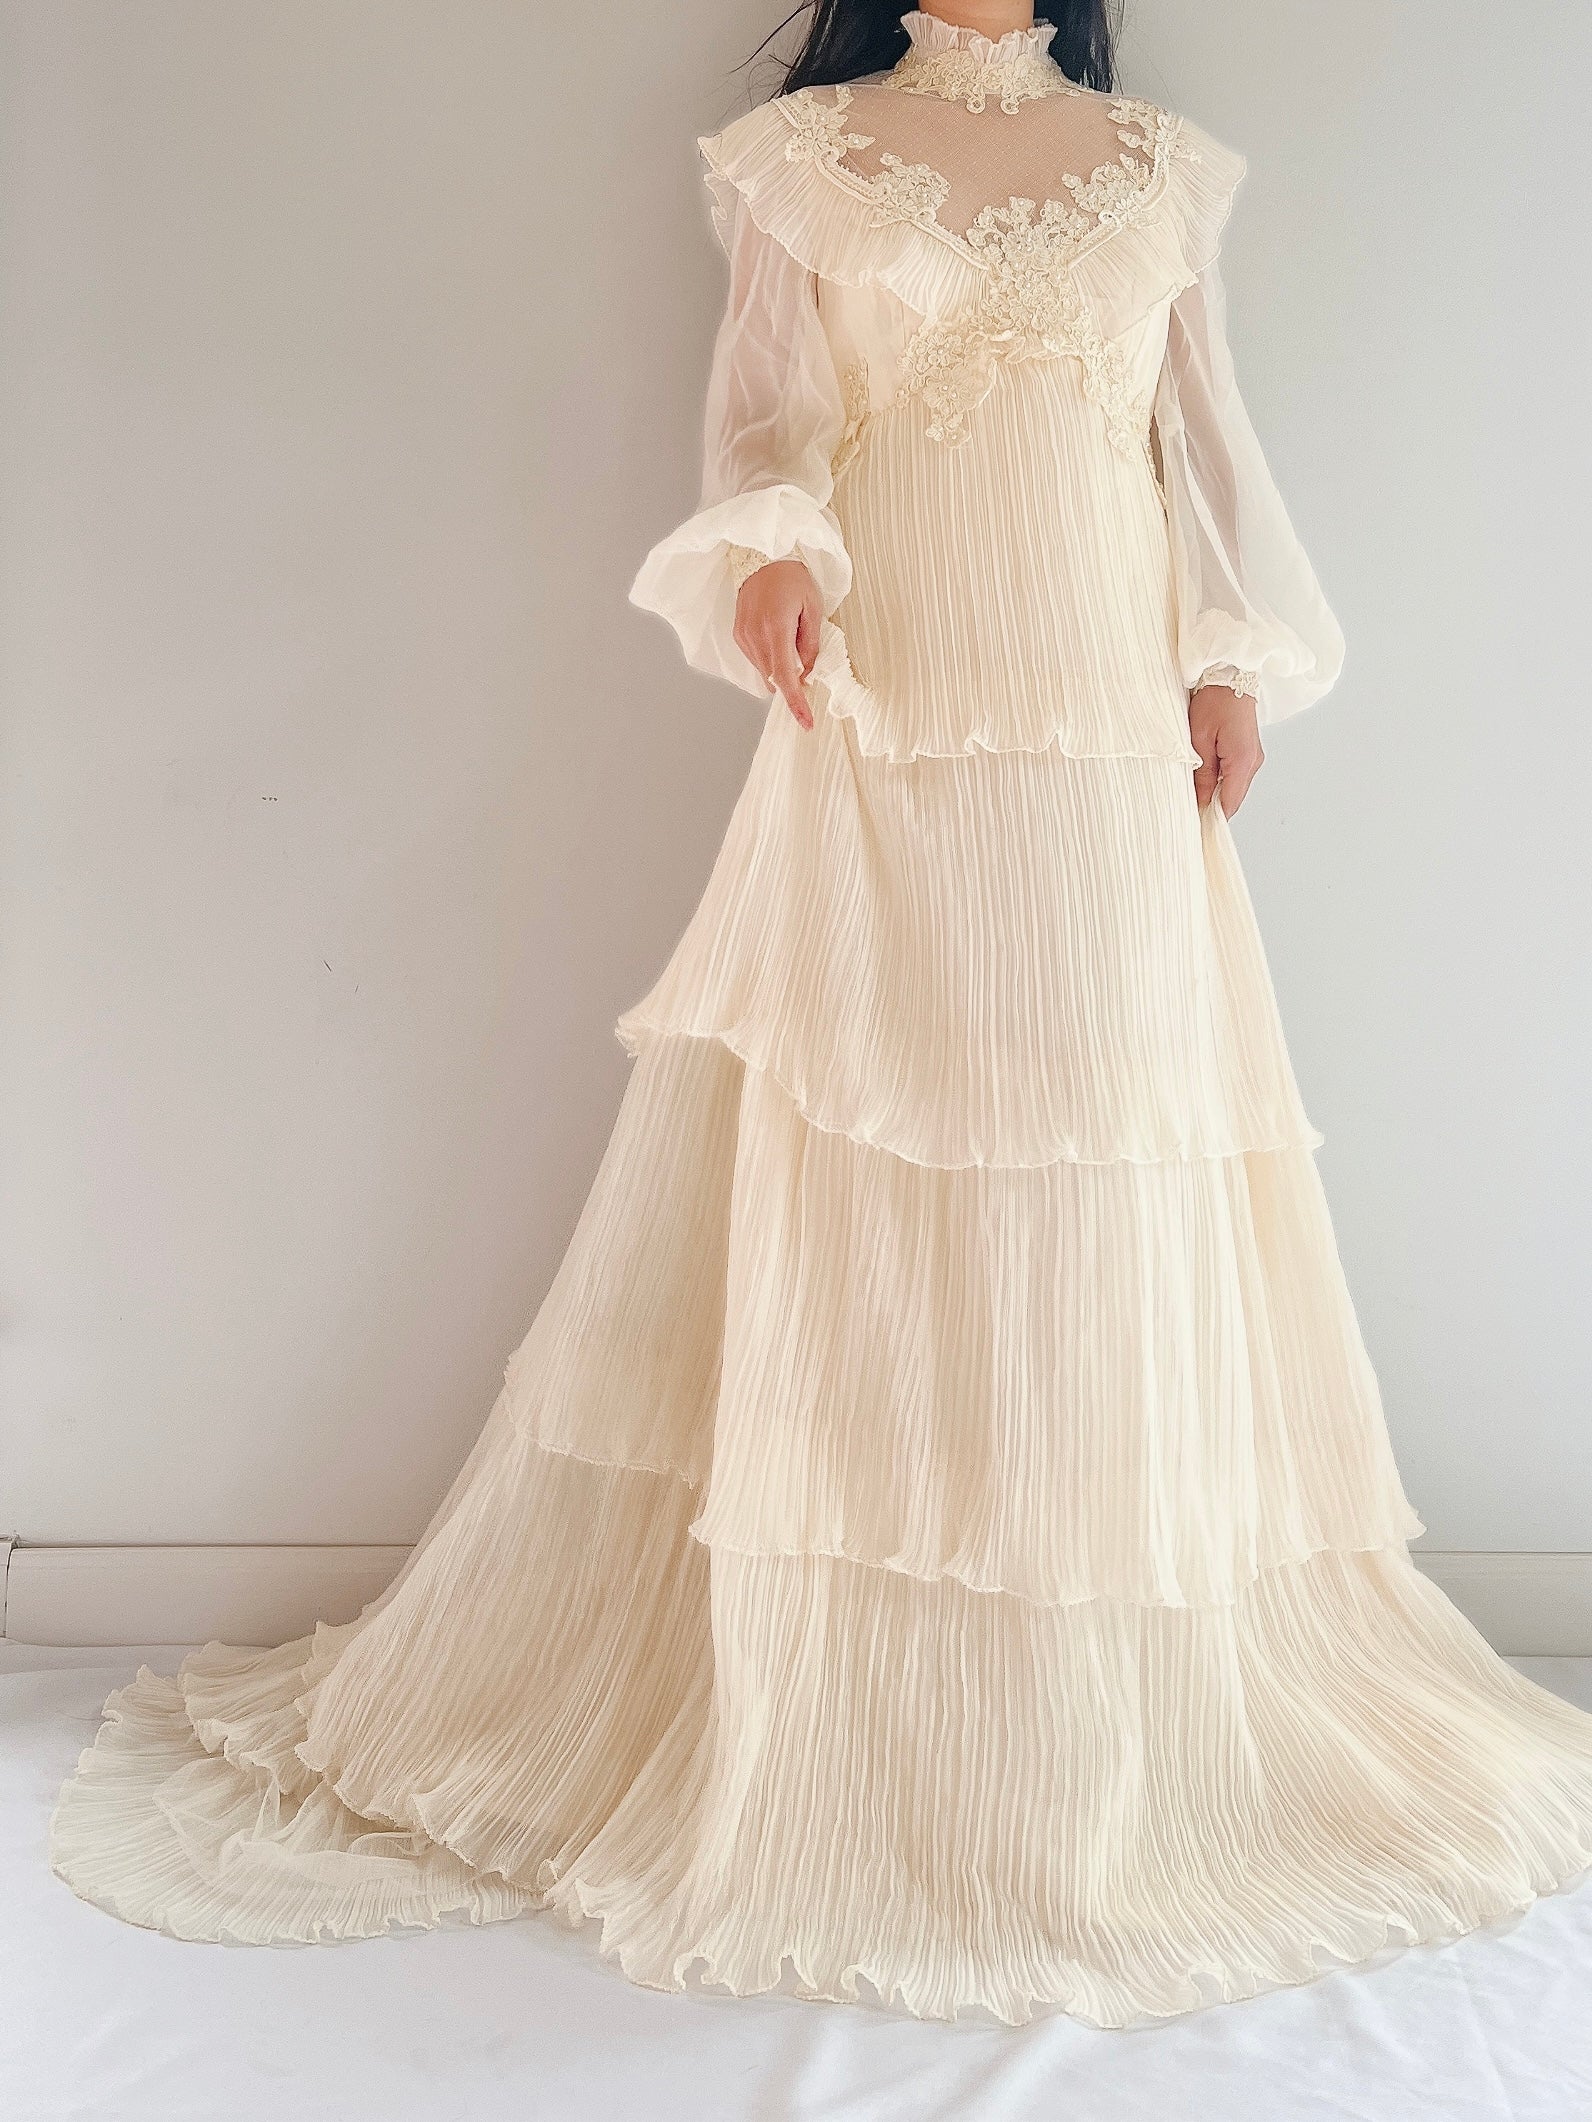 Vintage Pleated Chiffon Gown - M